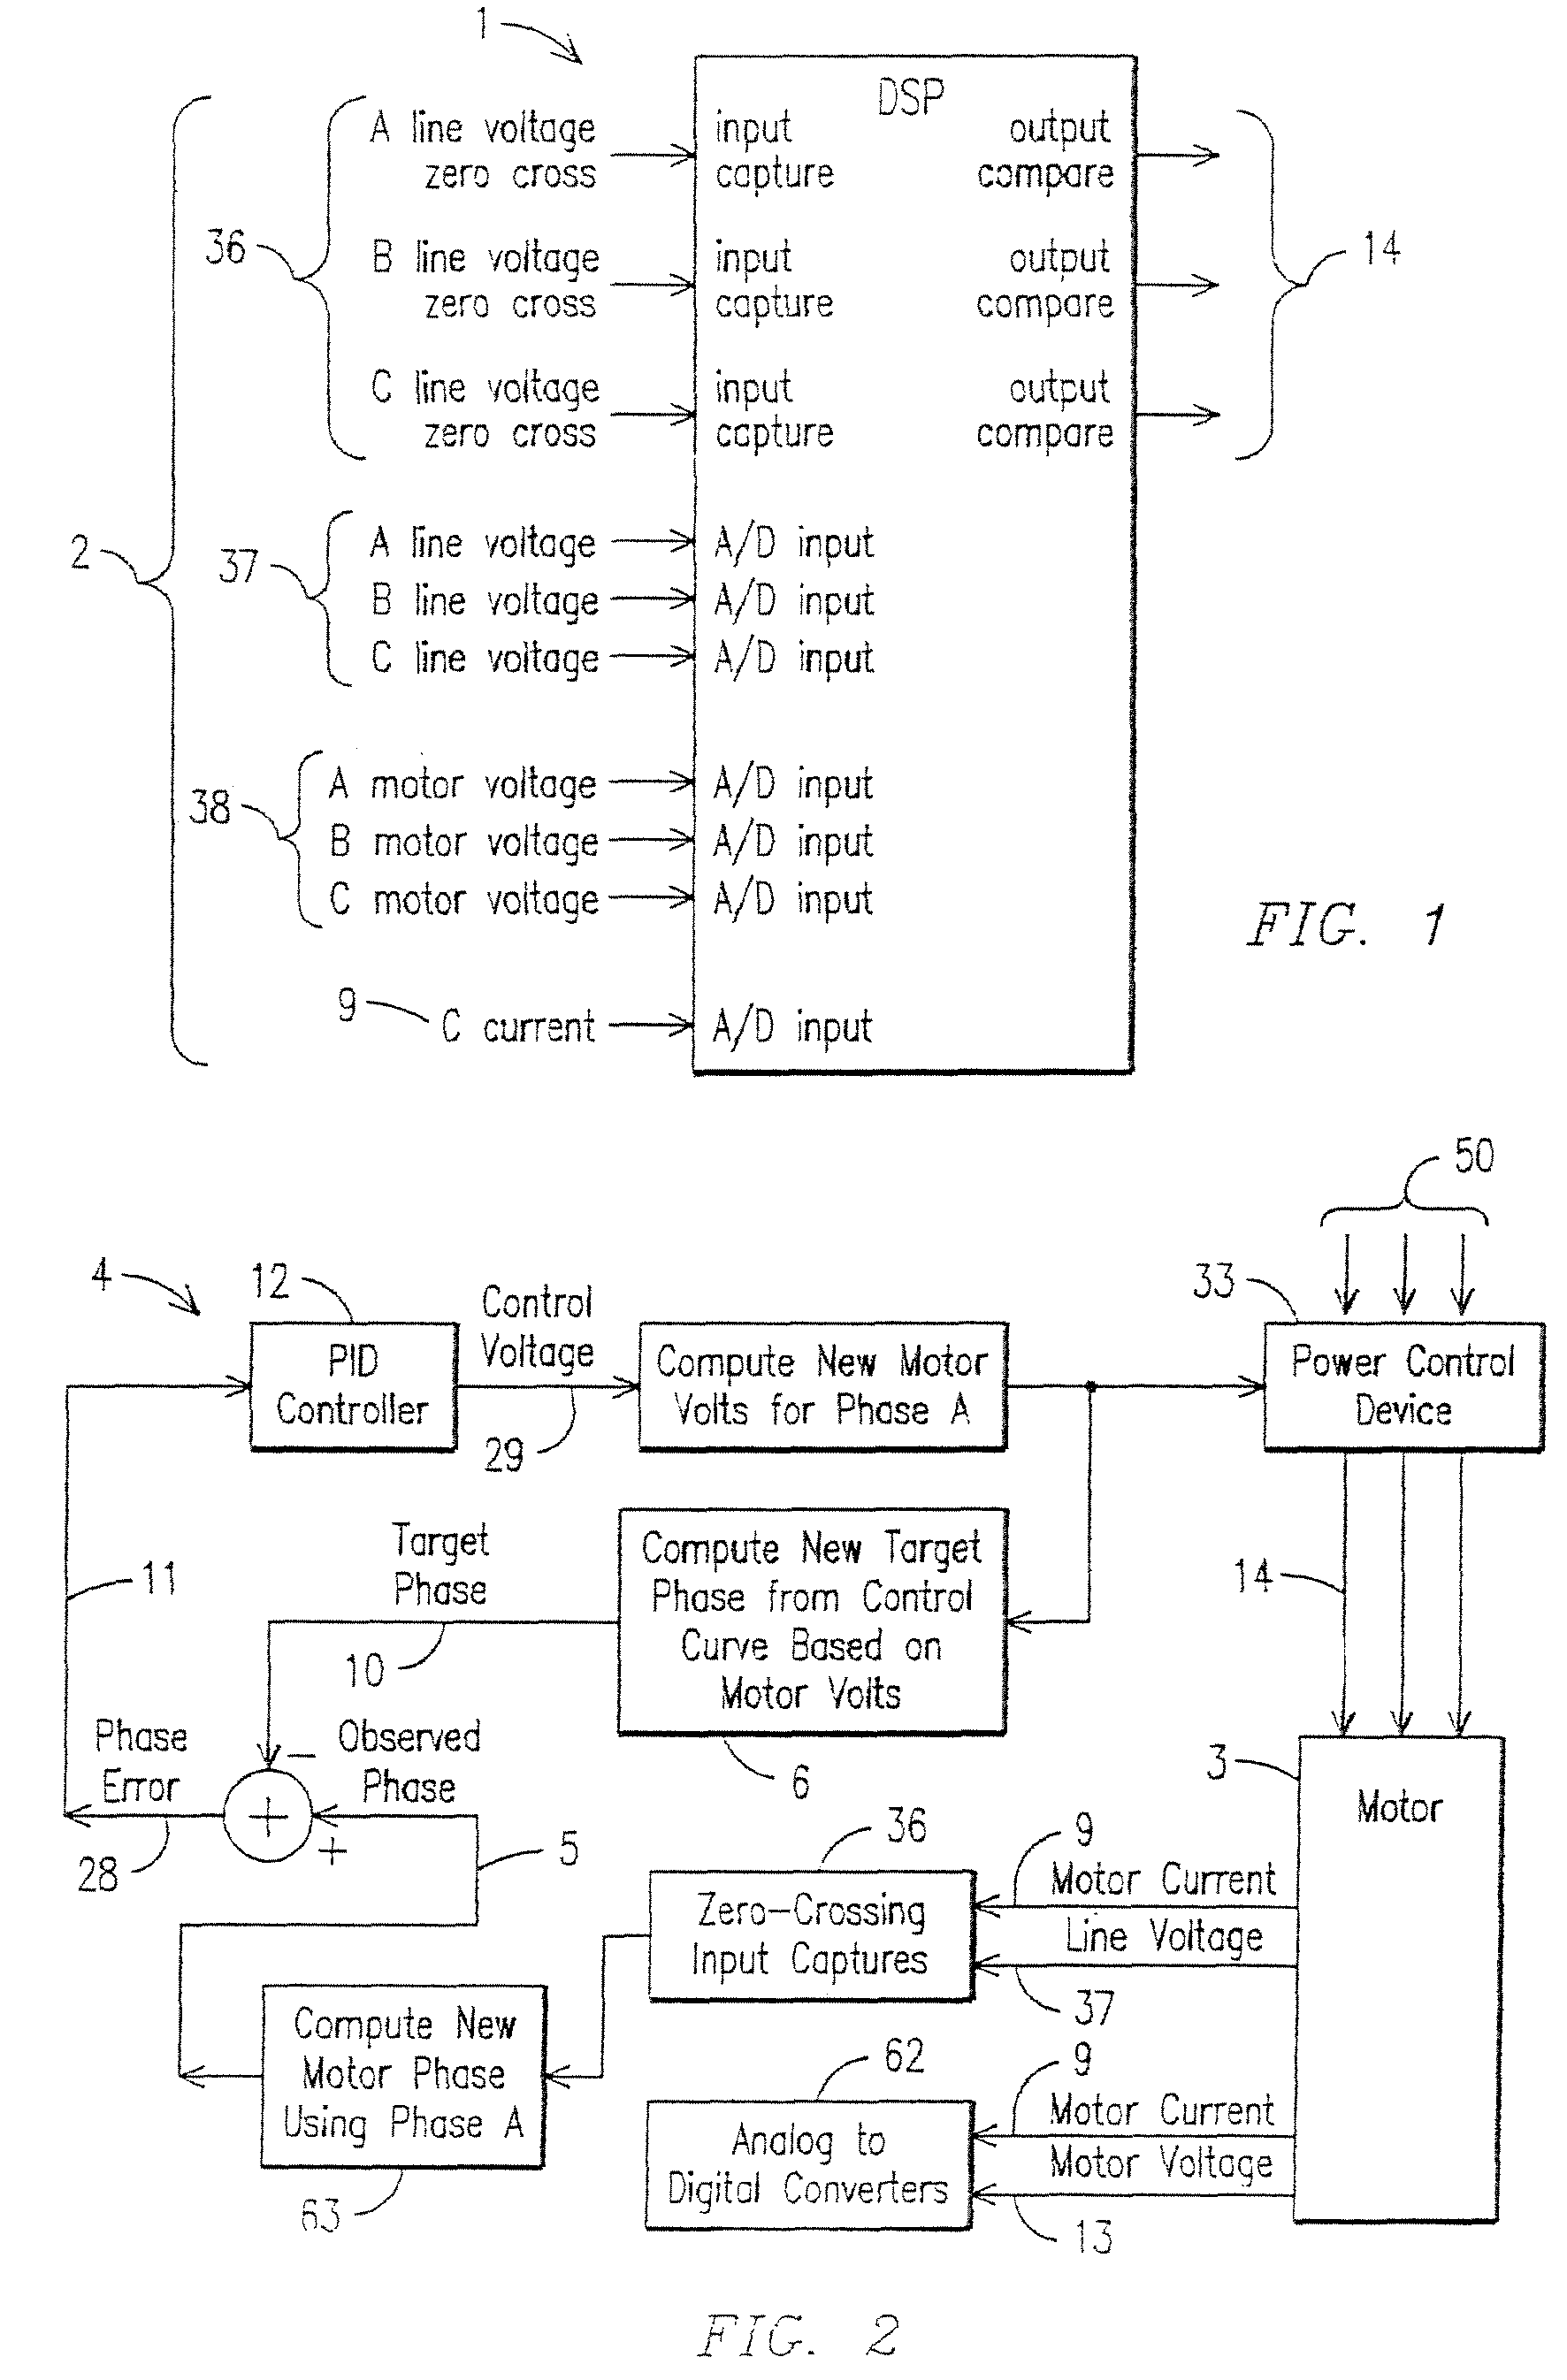 Method to save energy for devices with rotating or reciprocating masses